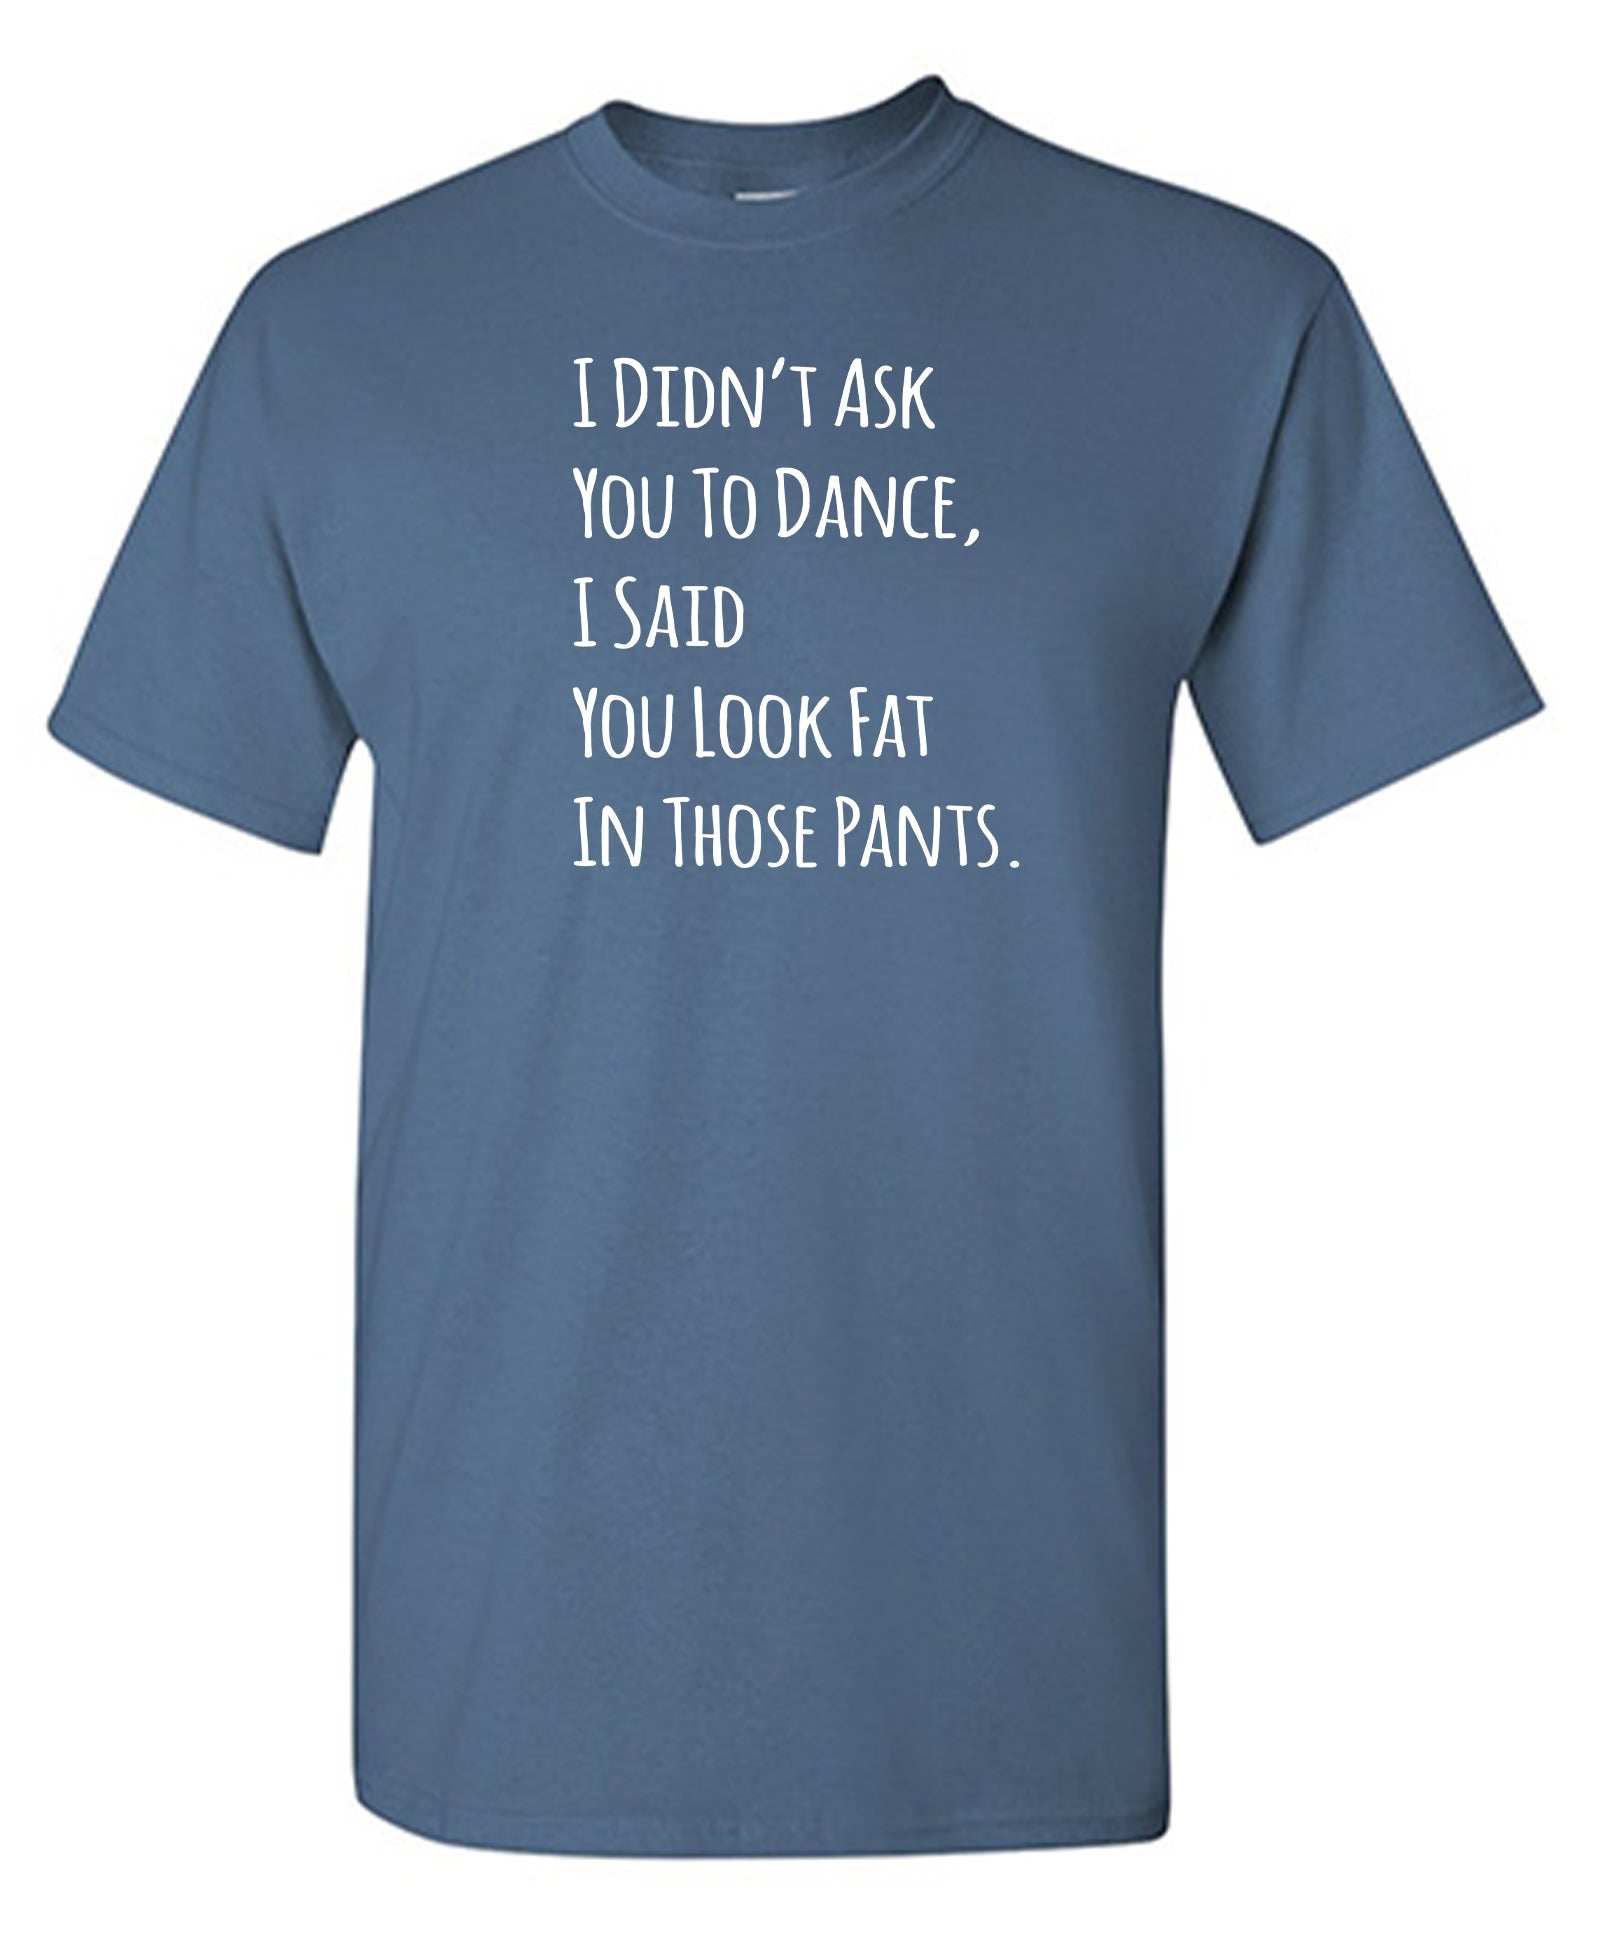 Didn't Ask You To Dance I Said You Look Fat In Those Pants - RedBarn Tees